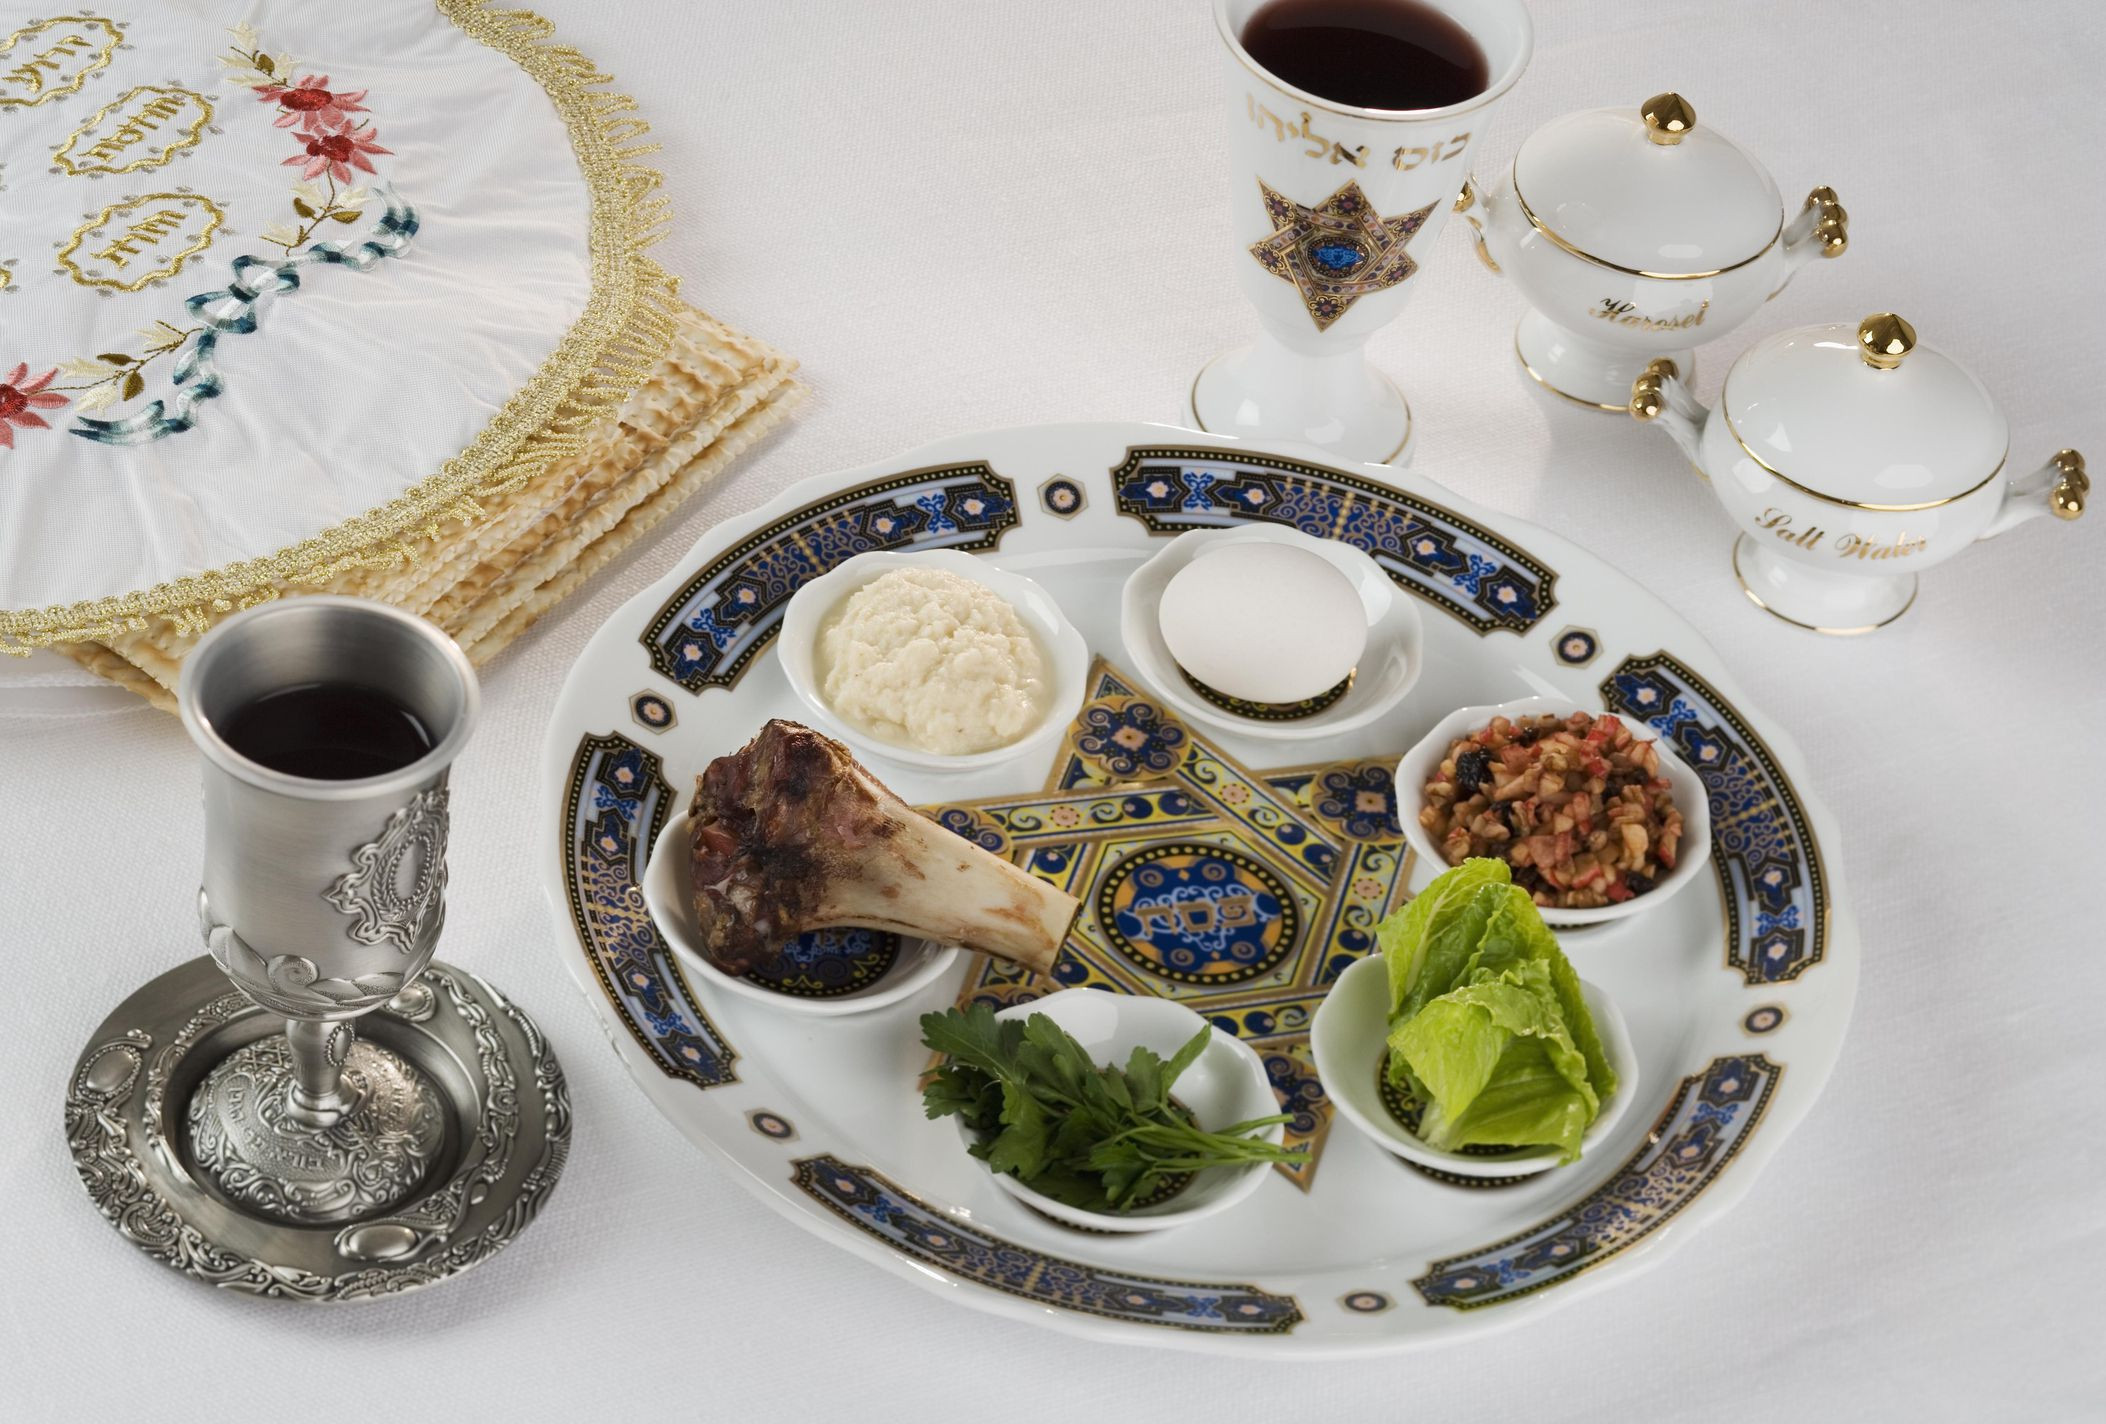 Traditional Jewish Food For Passover
 Traditional Passover Foods for the Seder Meal